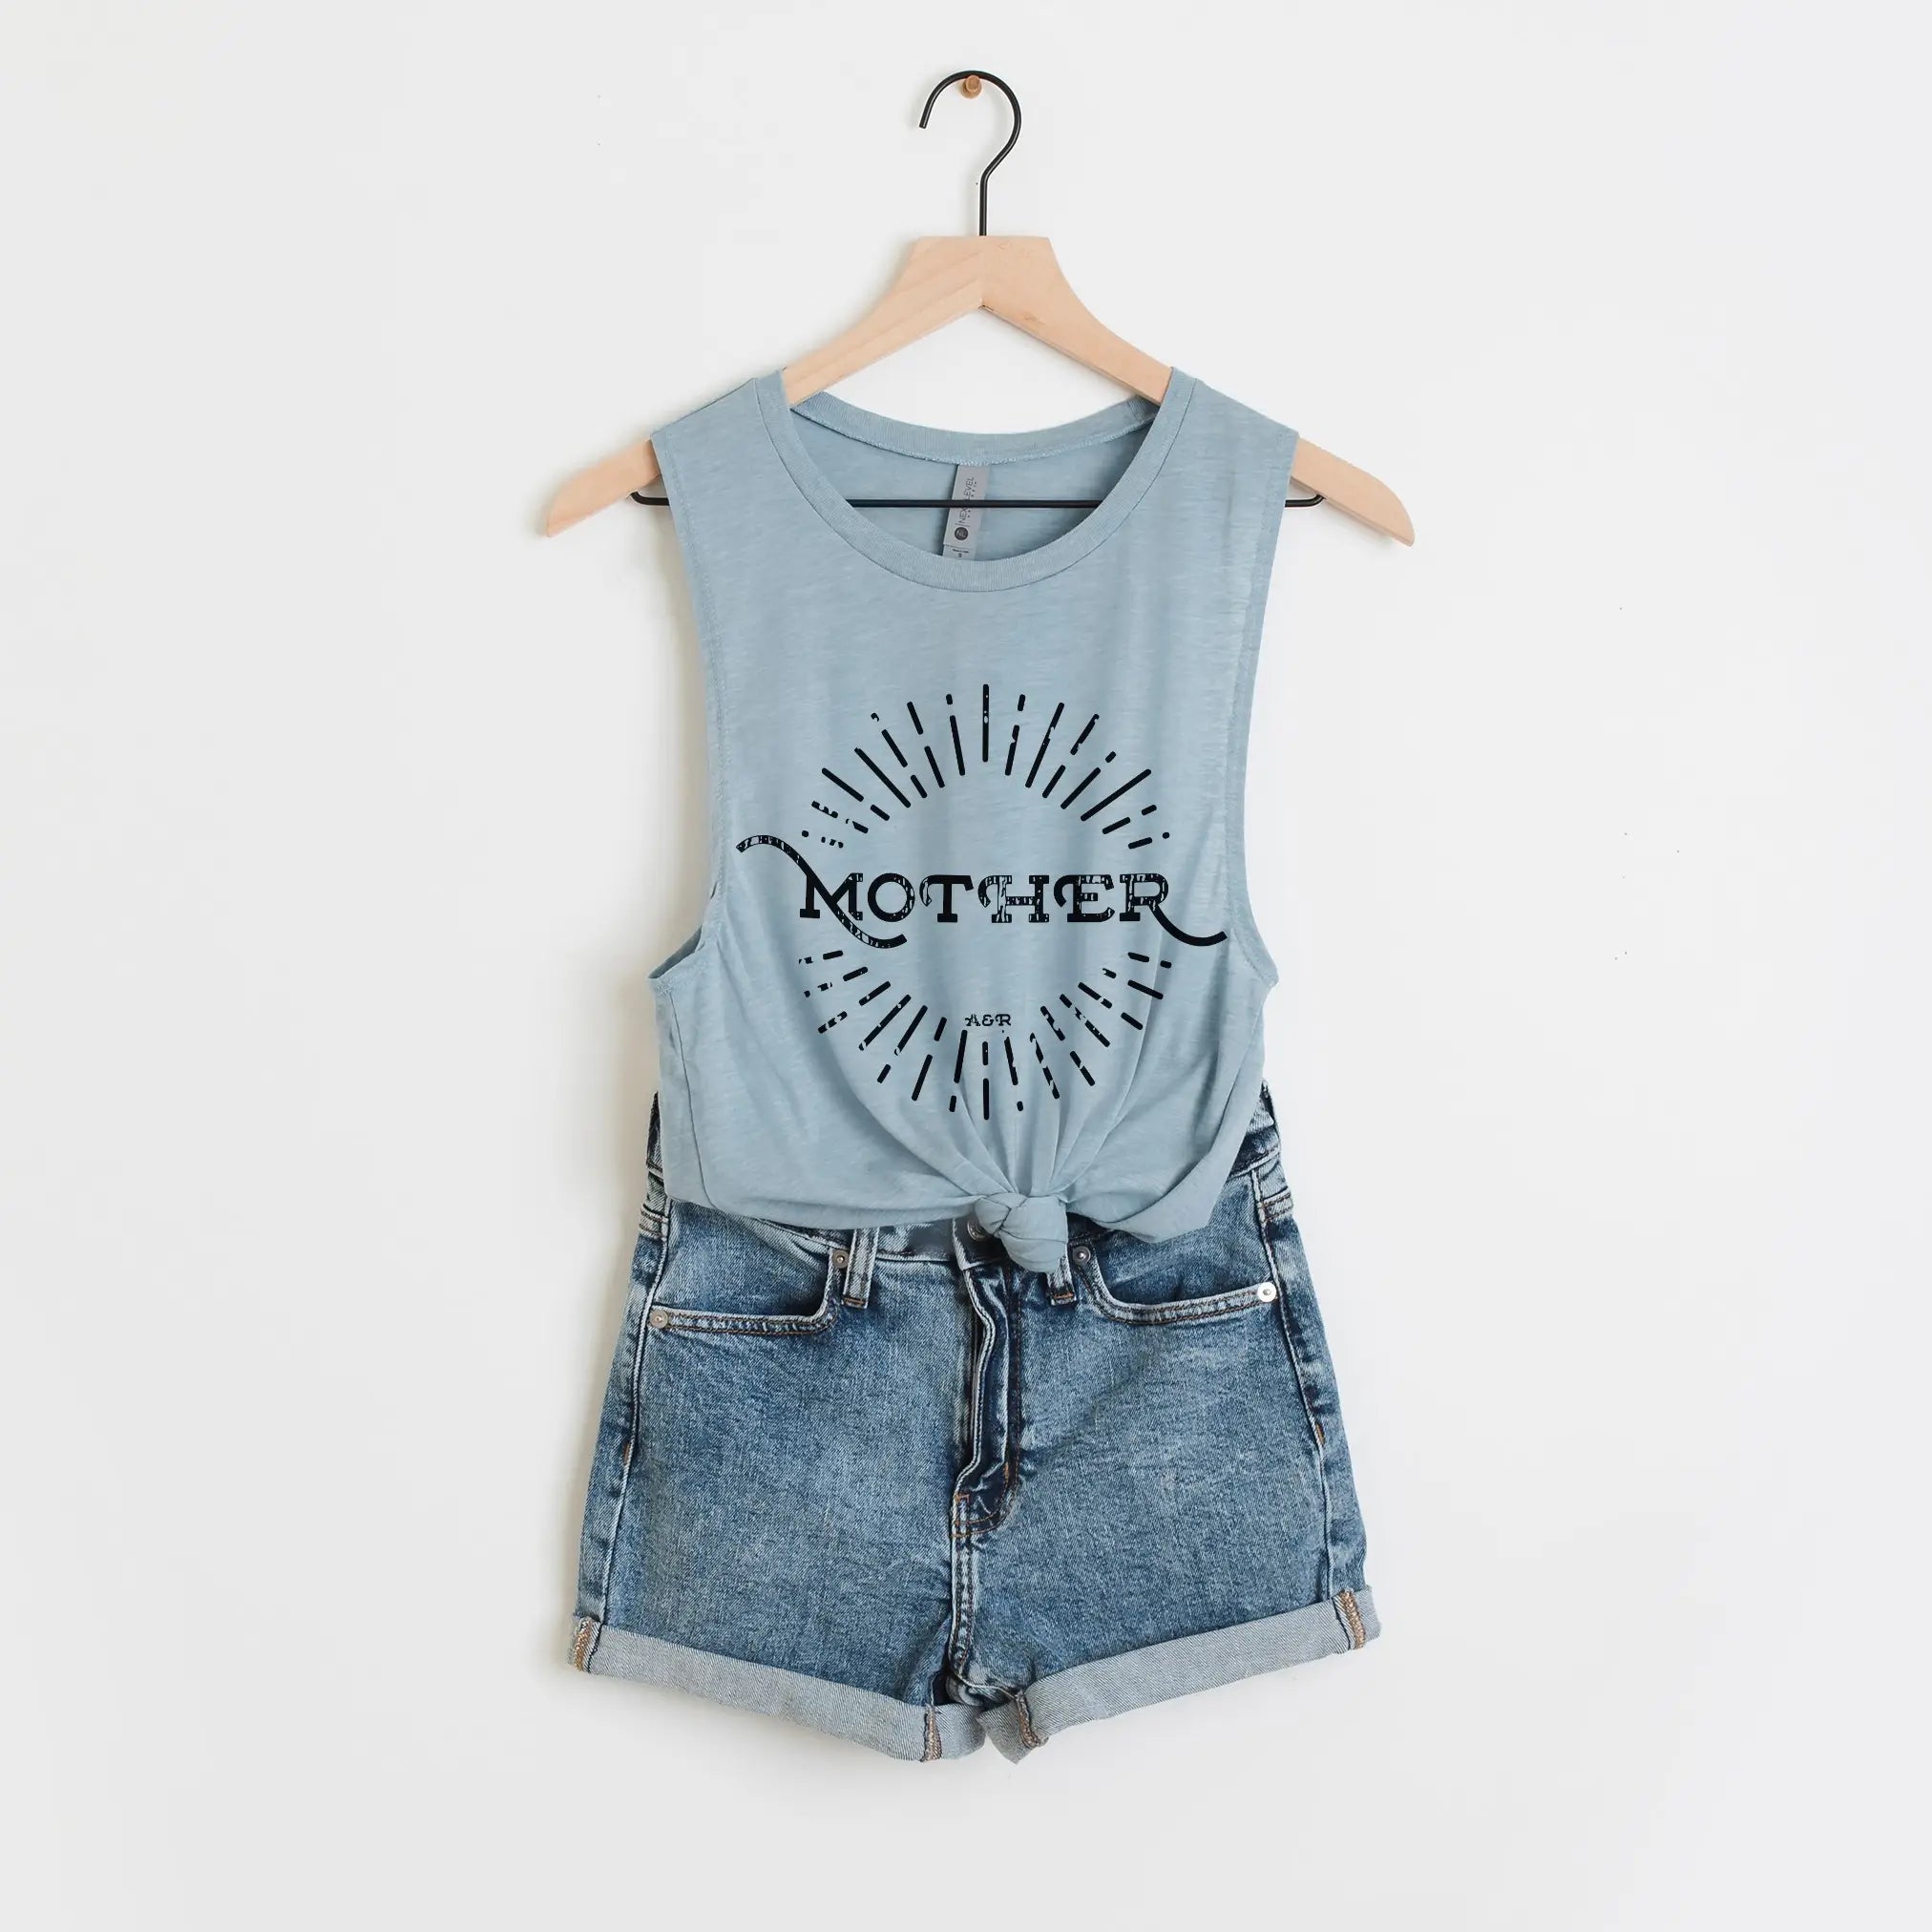 Retro Mother Festival Muscle Tank